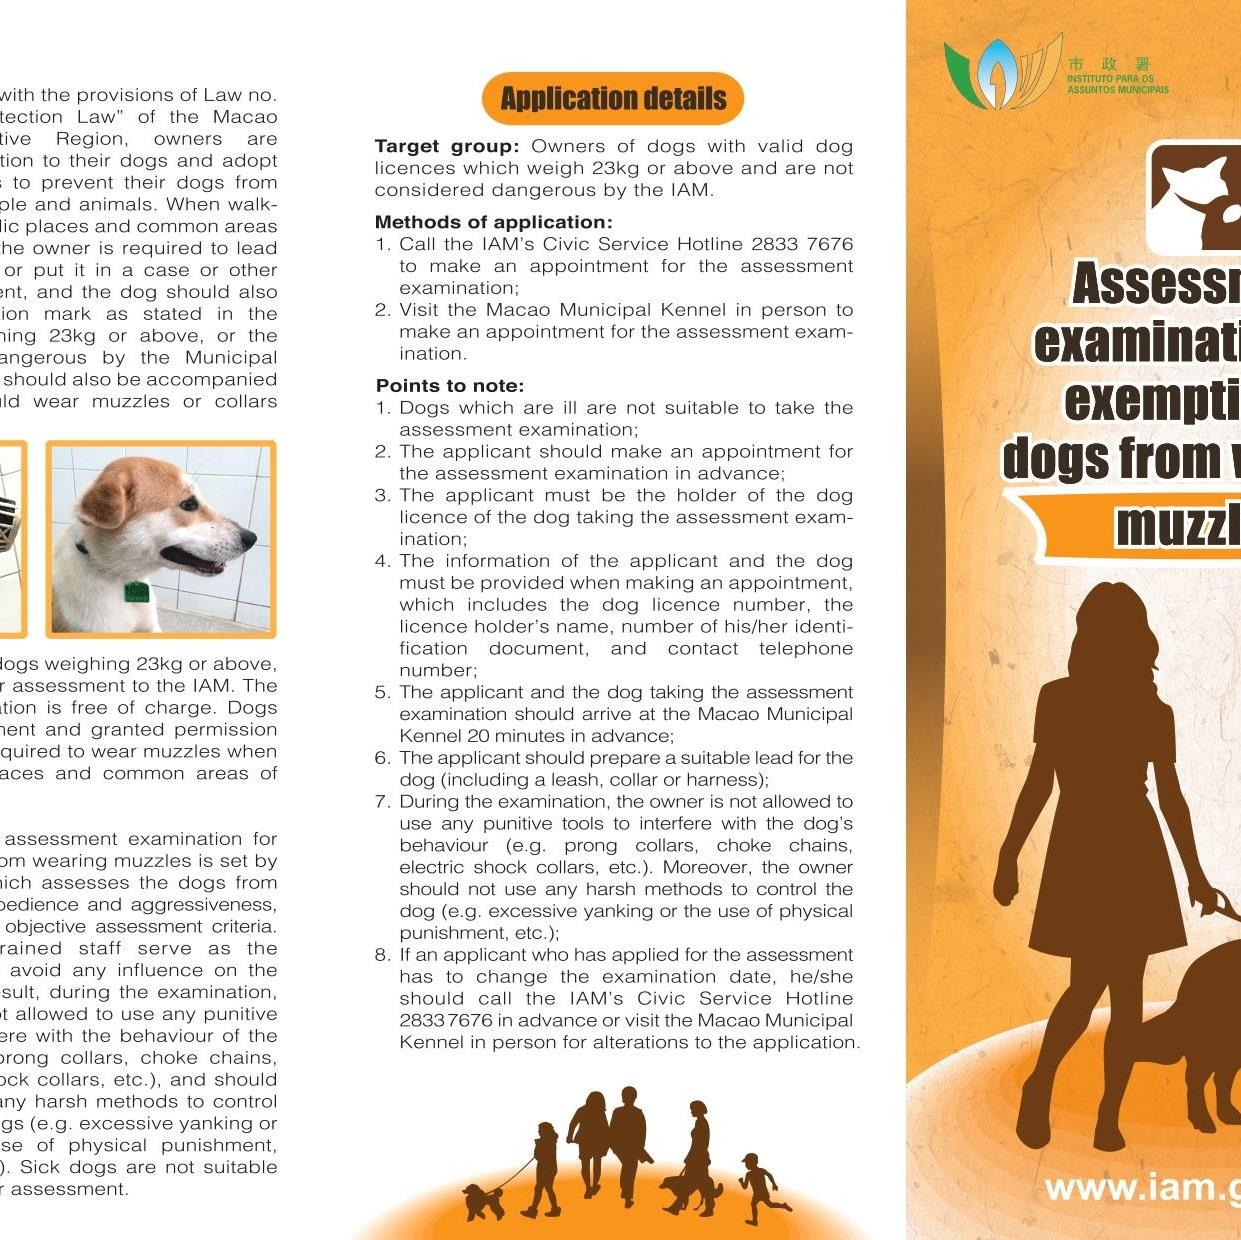 Assessment examination for exemption of dogs from wearing muzzles (I) 